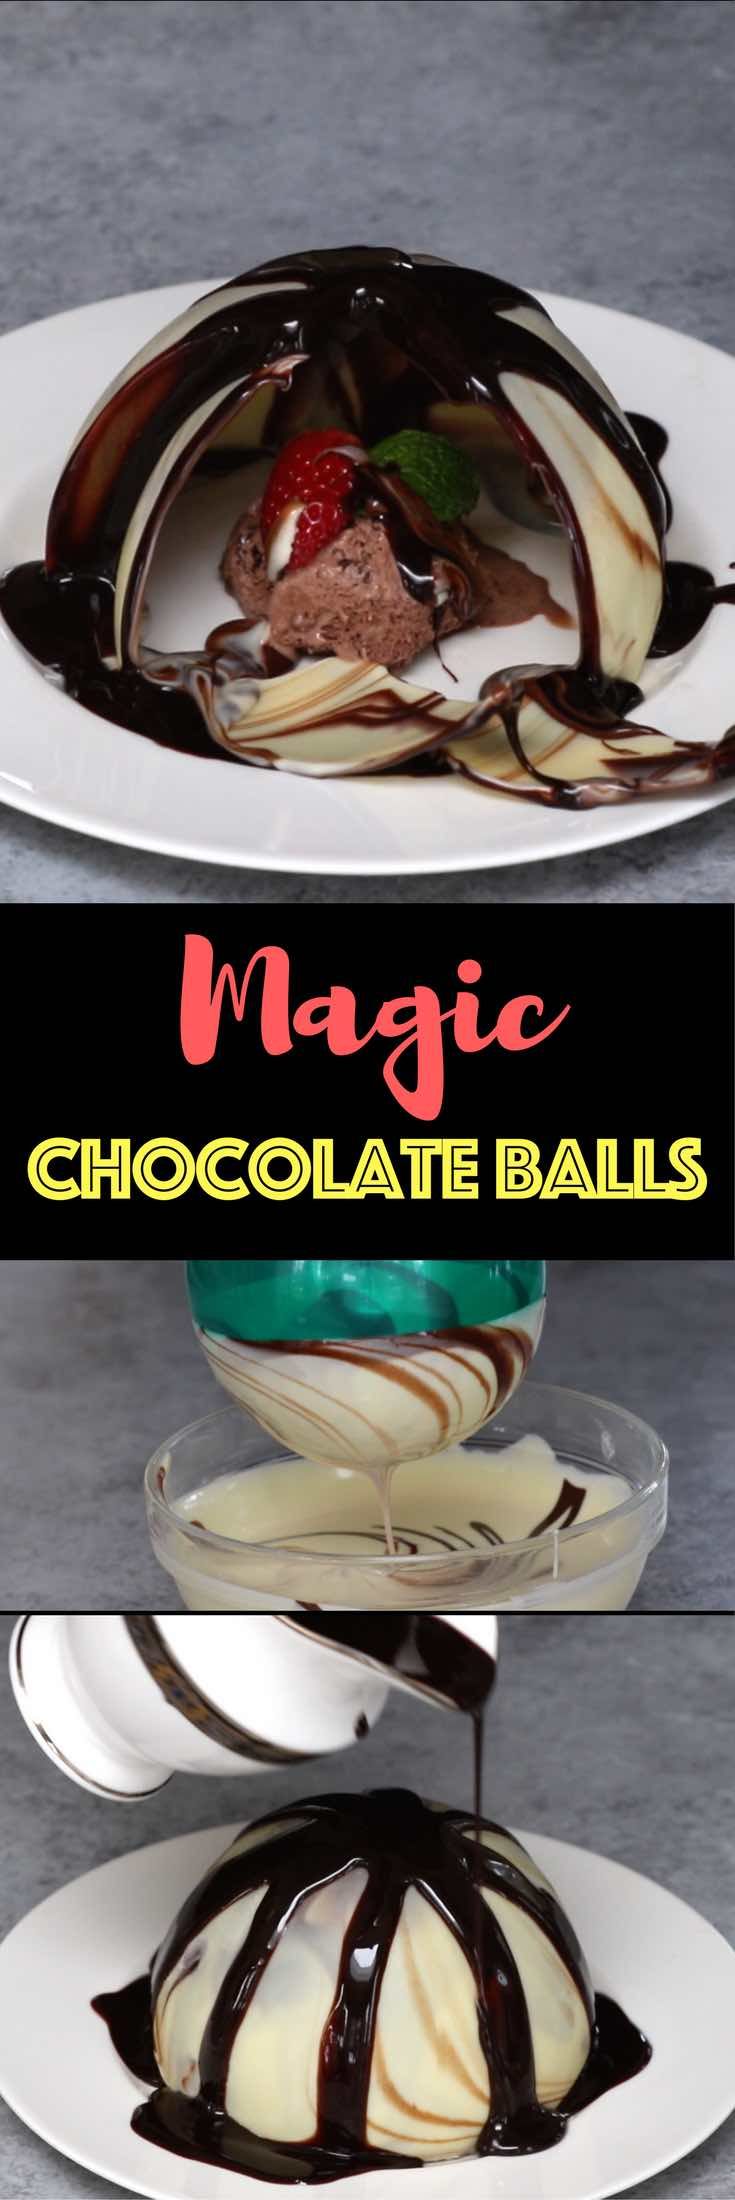 Melting Chocolate Ball {Chocolate Sphere} - TipBuzz -   19 desserts Creative awesome ideas